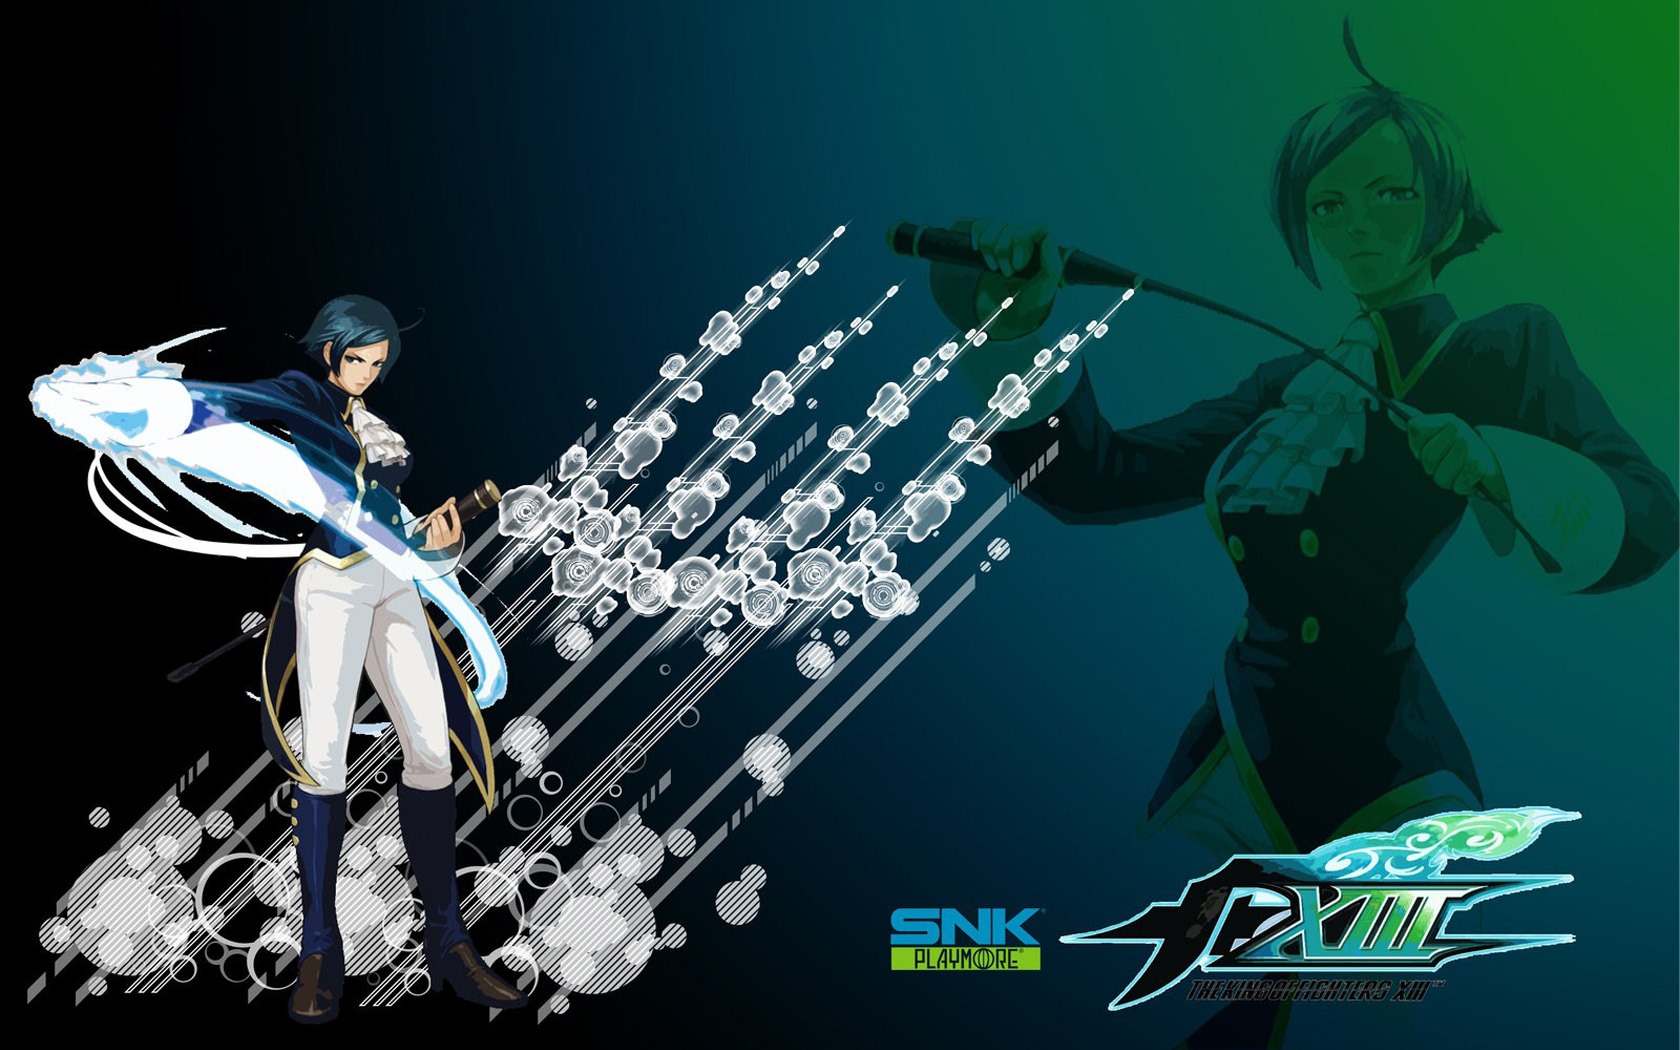 Le roi de wallpapers Fighters XIII #11 - 1680x1050